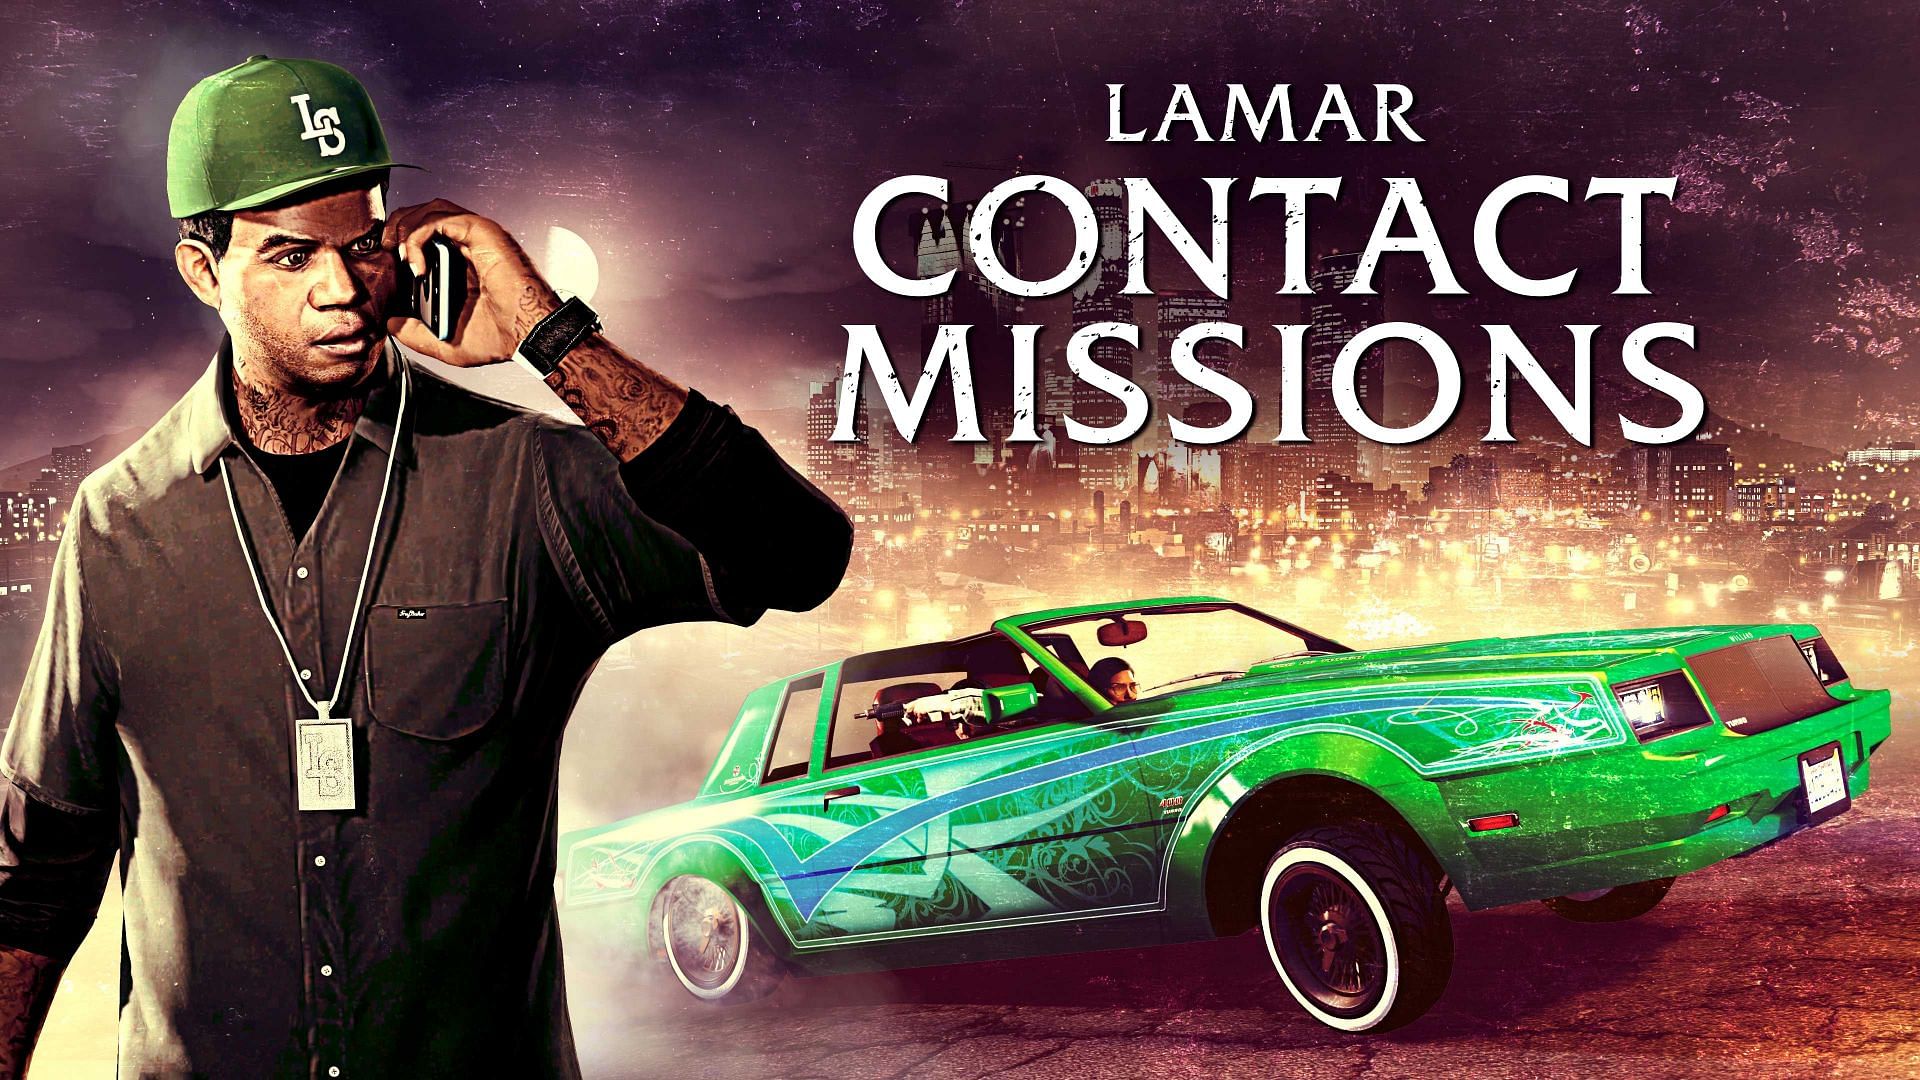 Lamar Contact Missions are paying 2x cash and 4x RP this week. (Image via Rockstar Games)